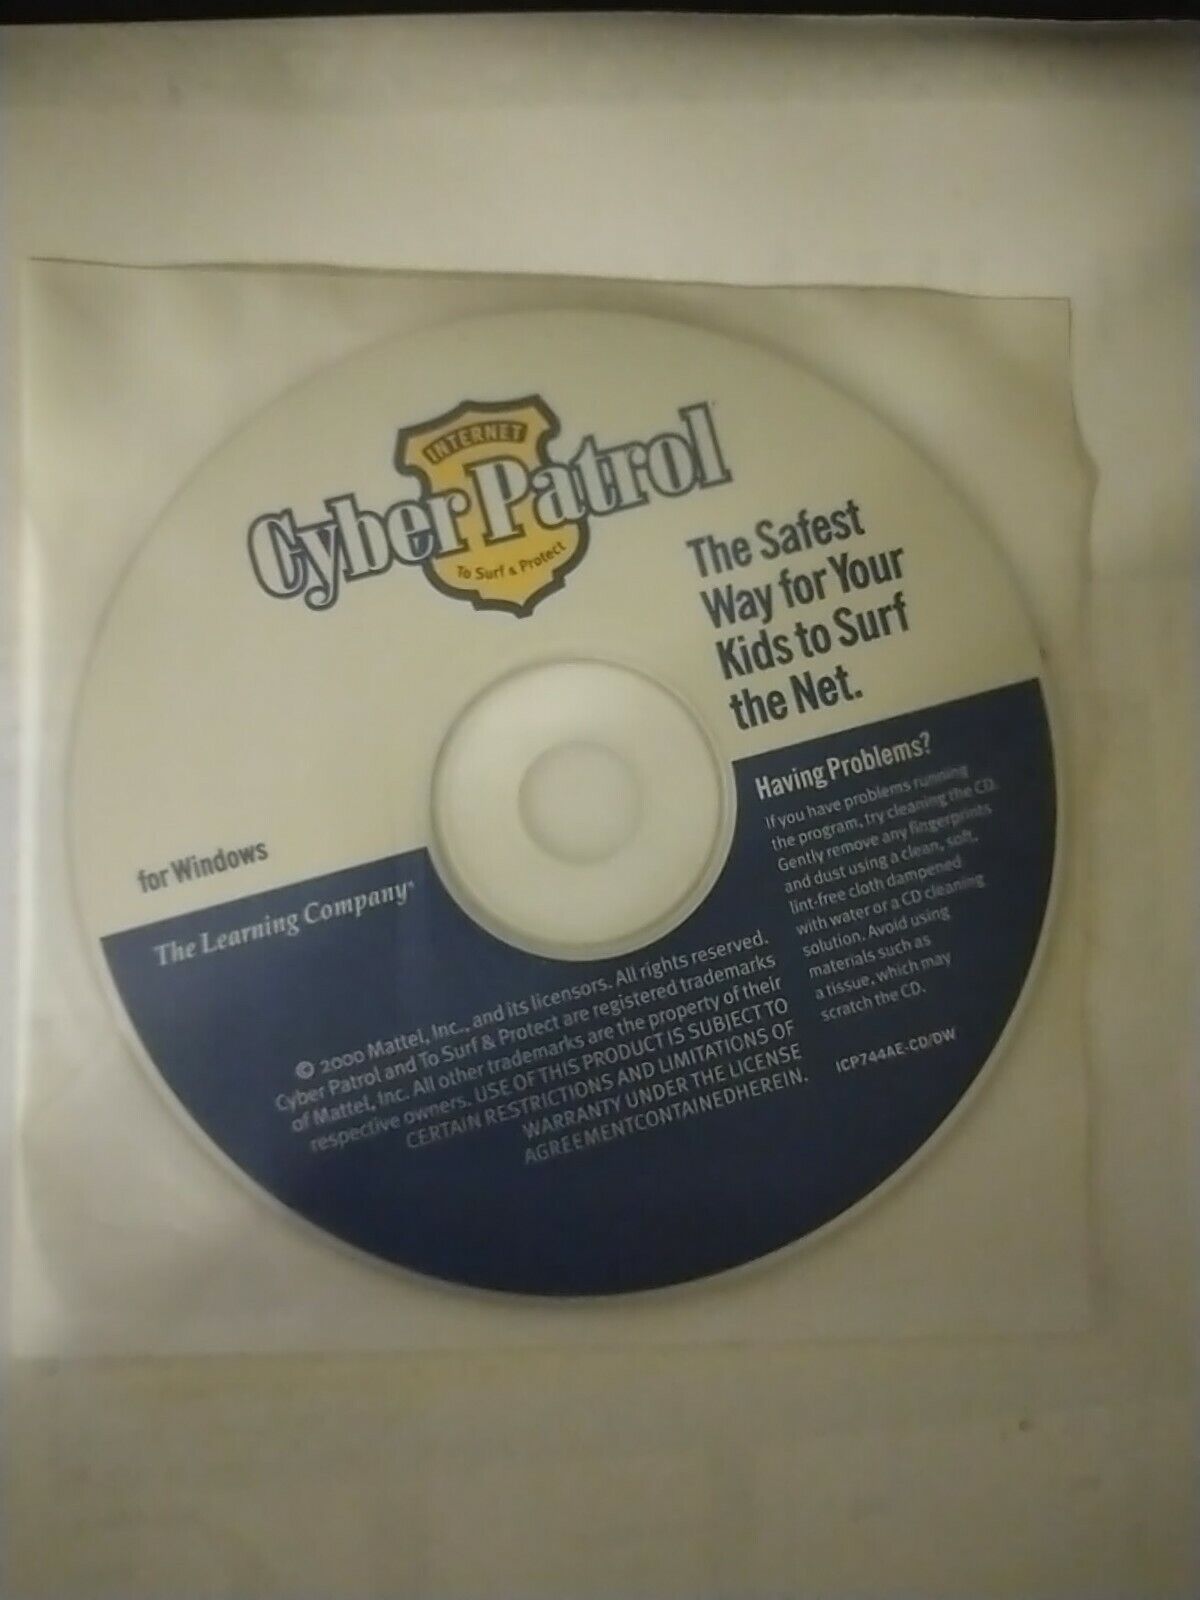 Internet Cyber Patrol CD-ROM by The Learning Company for Windows